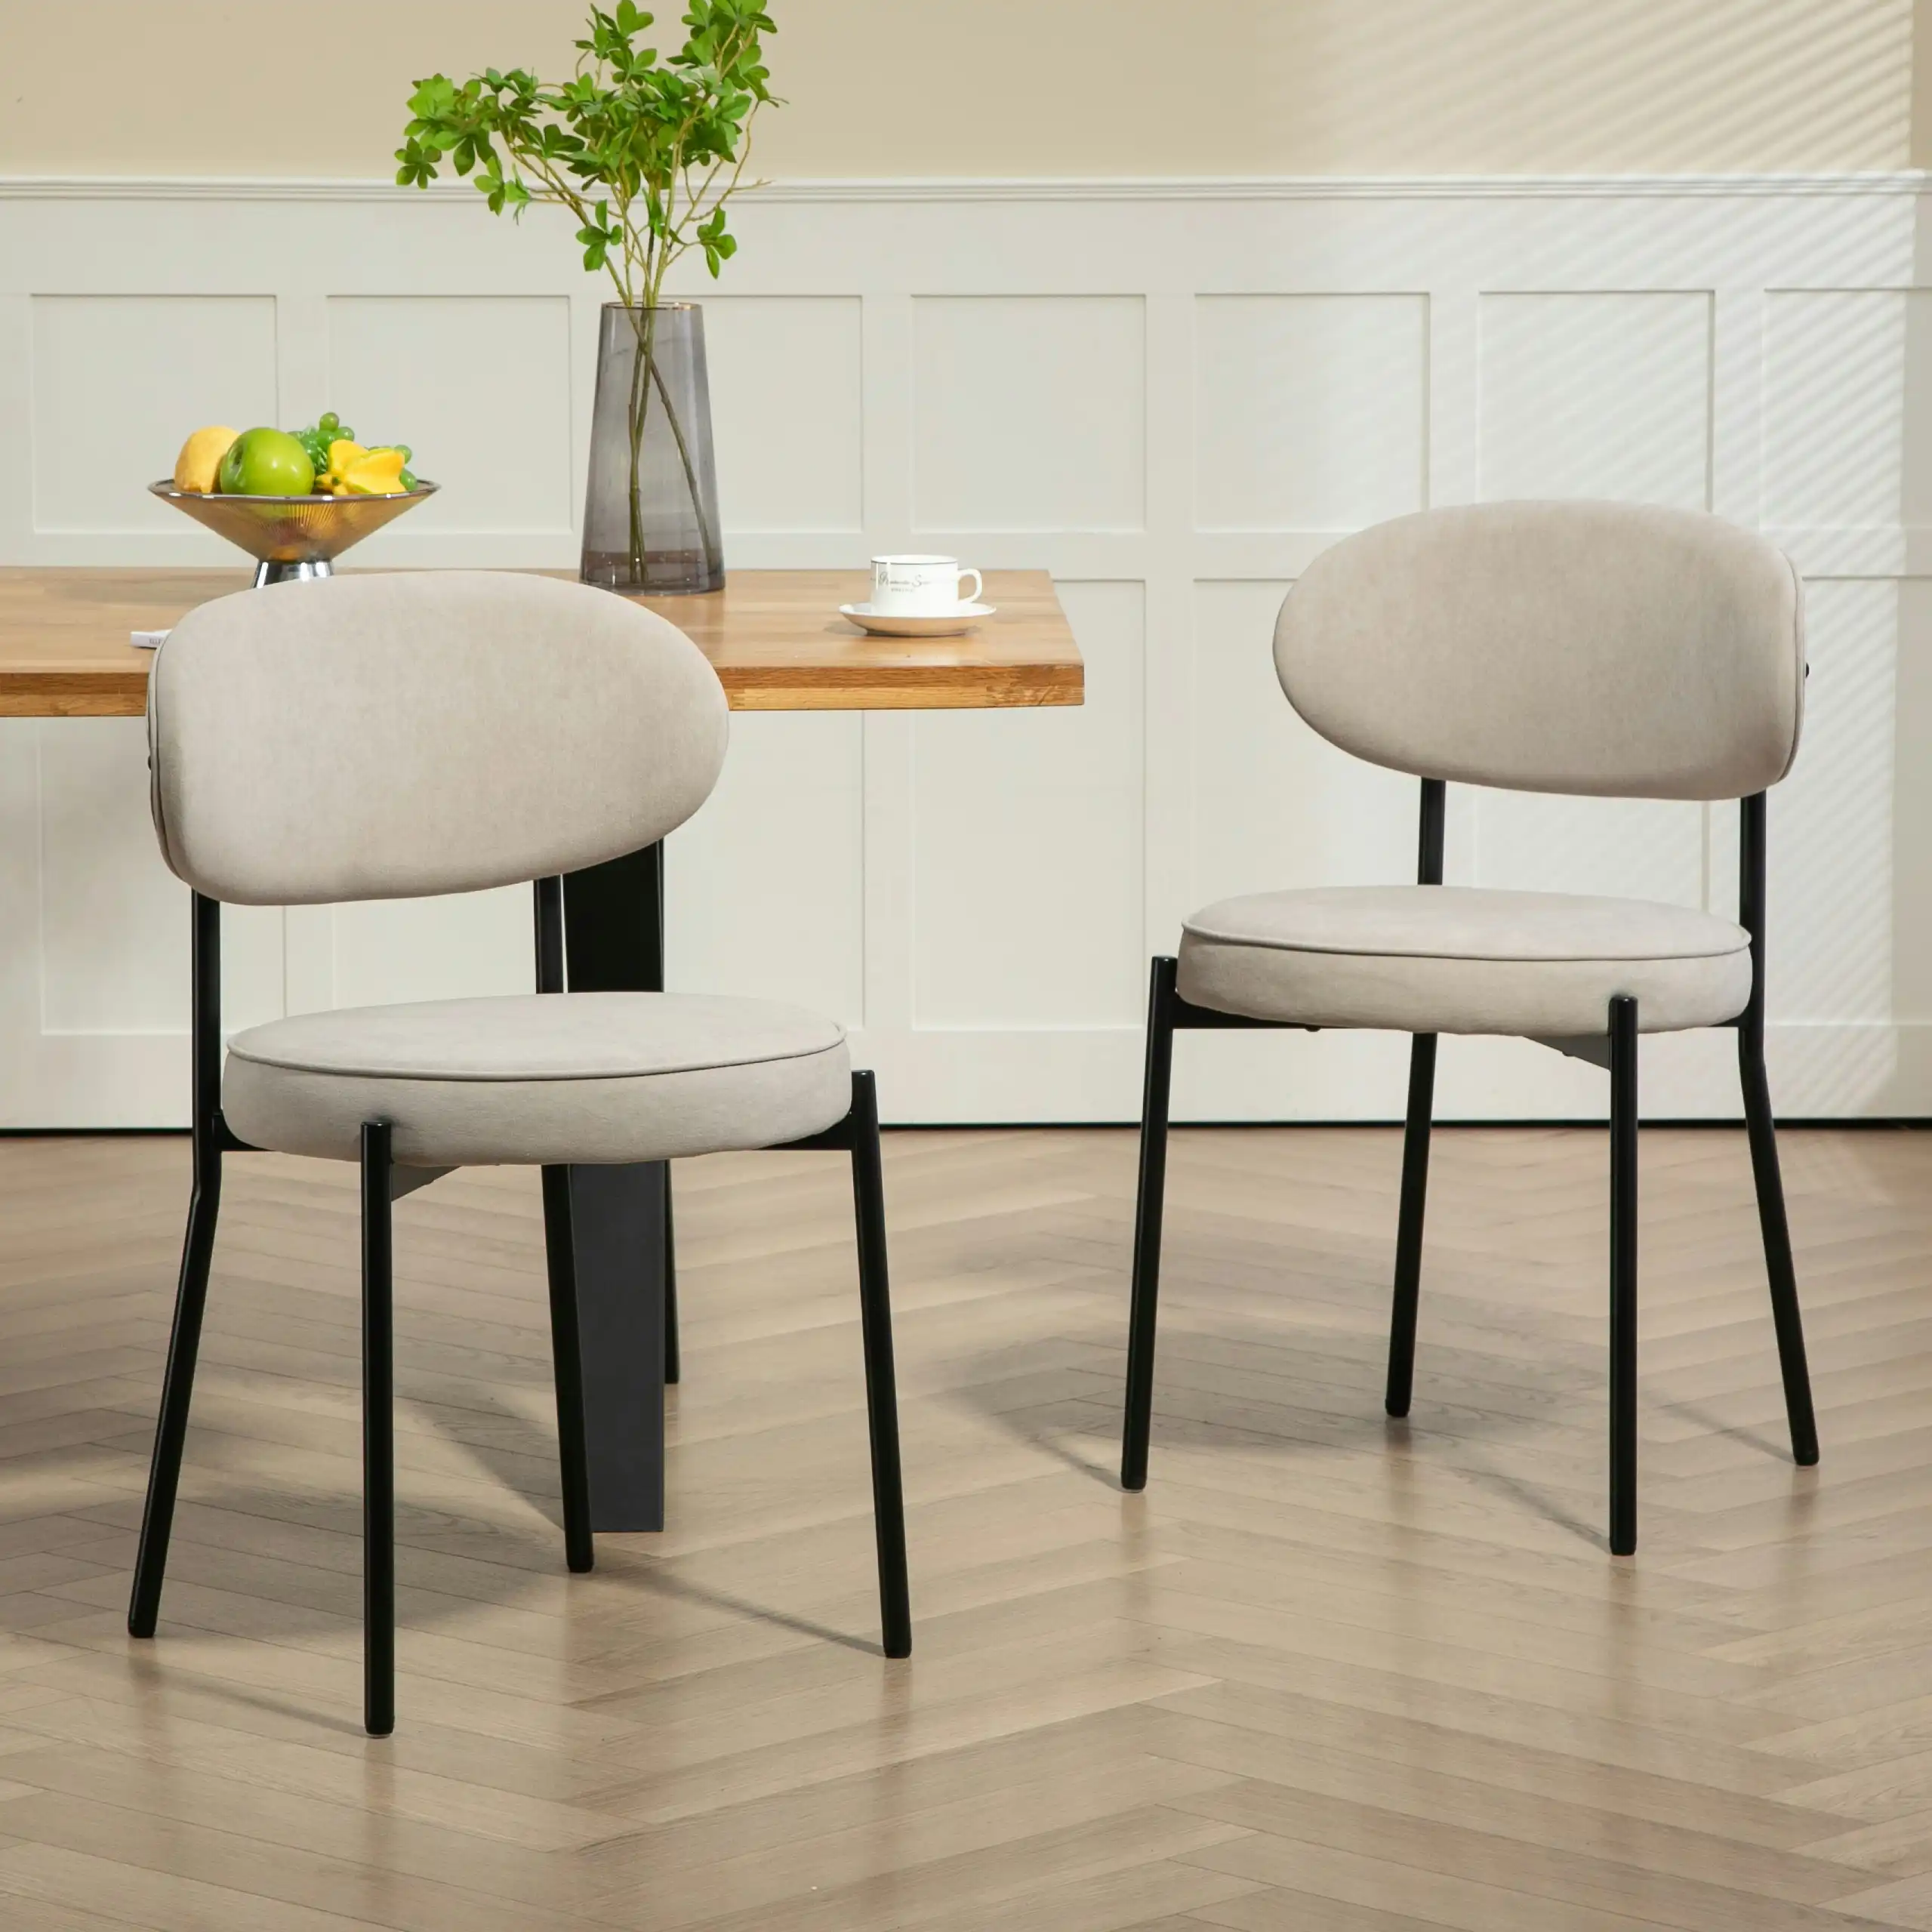 IHOMDEC Mid-Century Round Upholstered Dining Chair with Metal Frame and Legs Set of 2 Light Grey